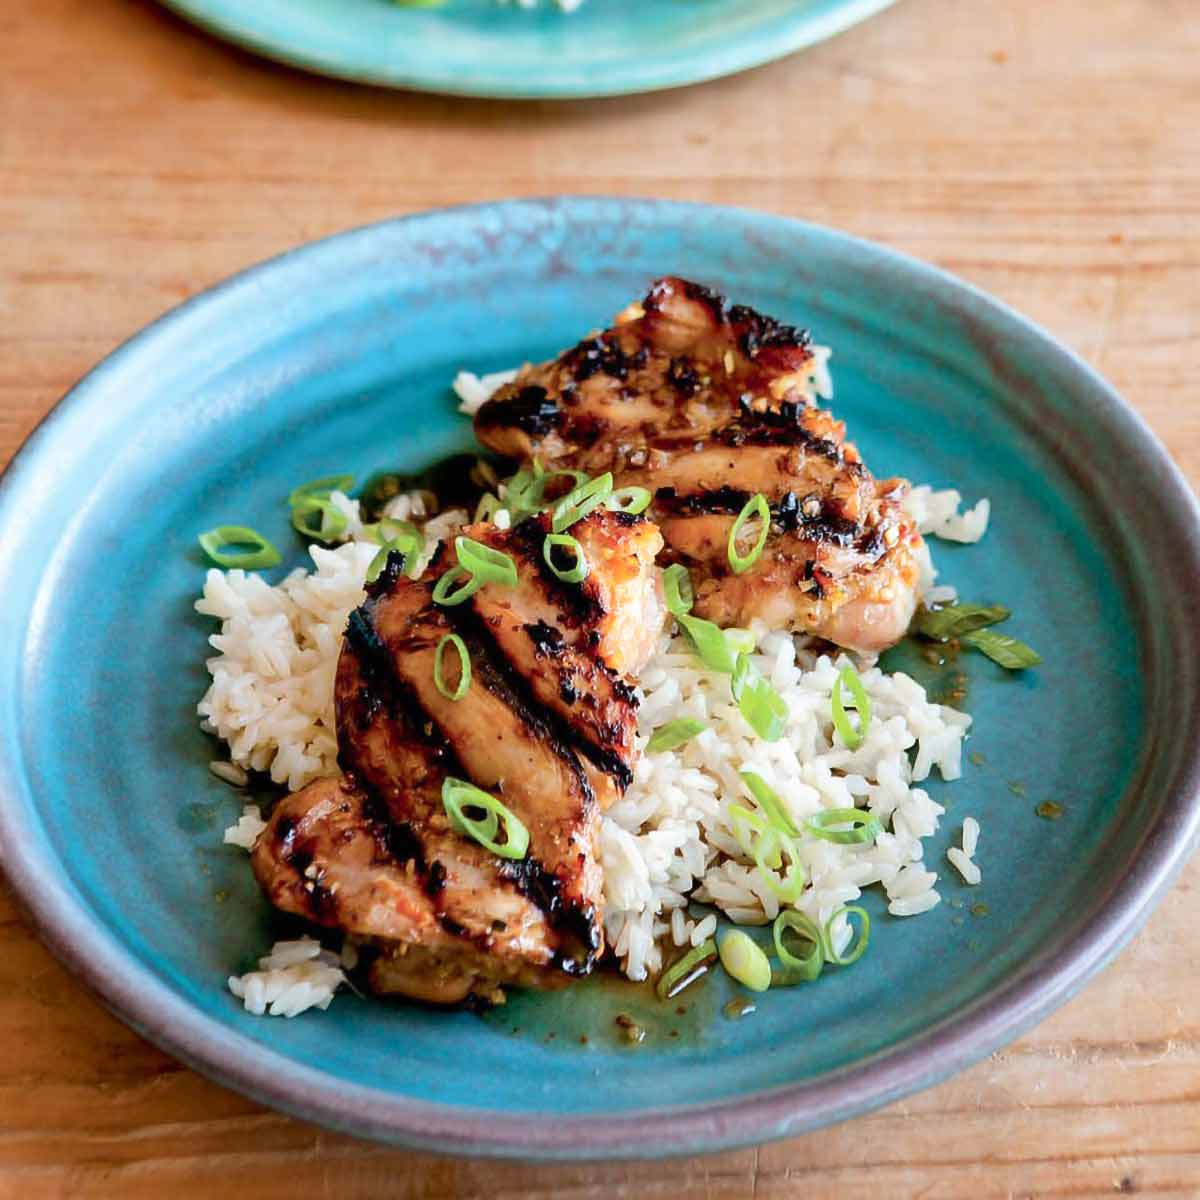 Two pieces of grilled lemongrass chicken on rice garnished with spring onions on a blue plate.